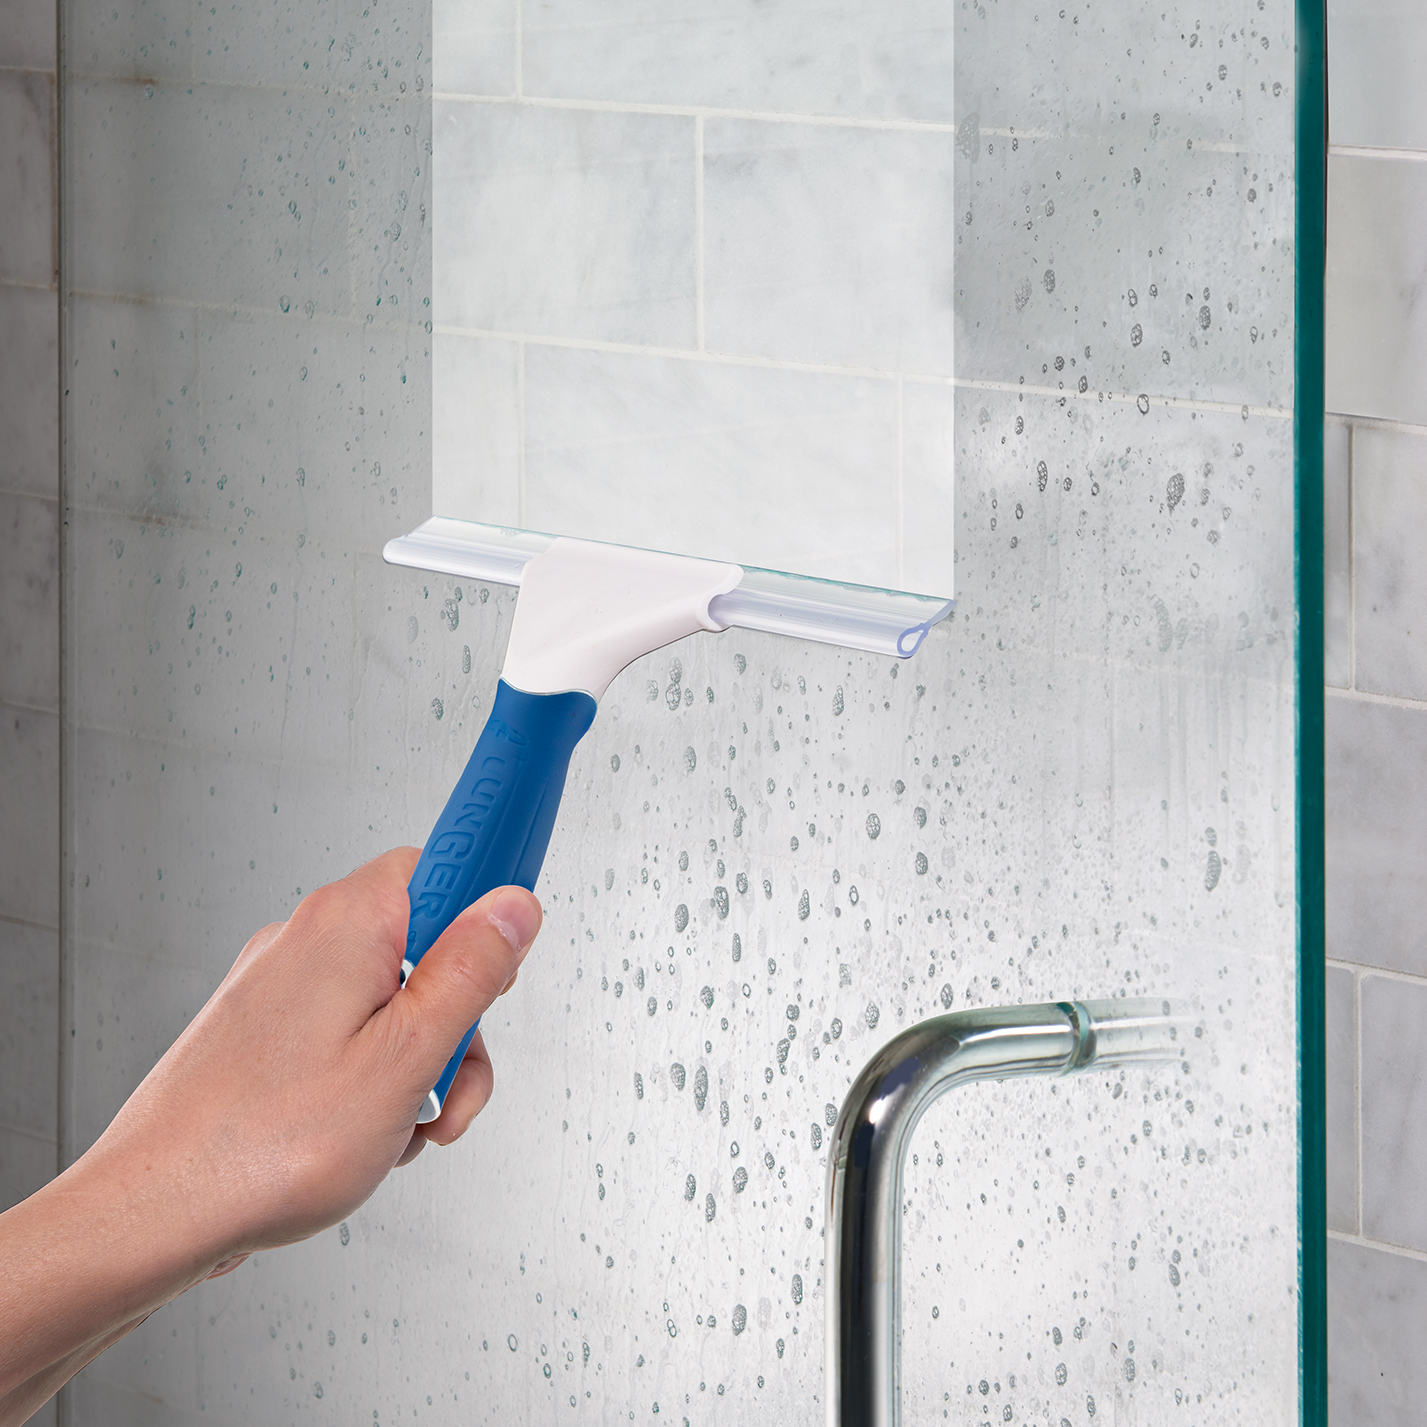 989800 Shower Squeegee in use